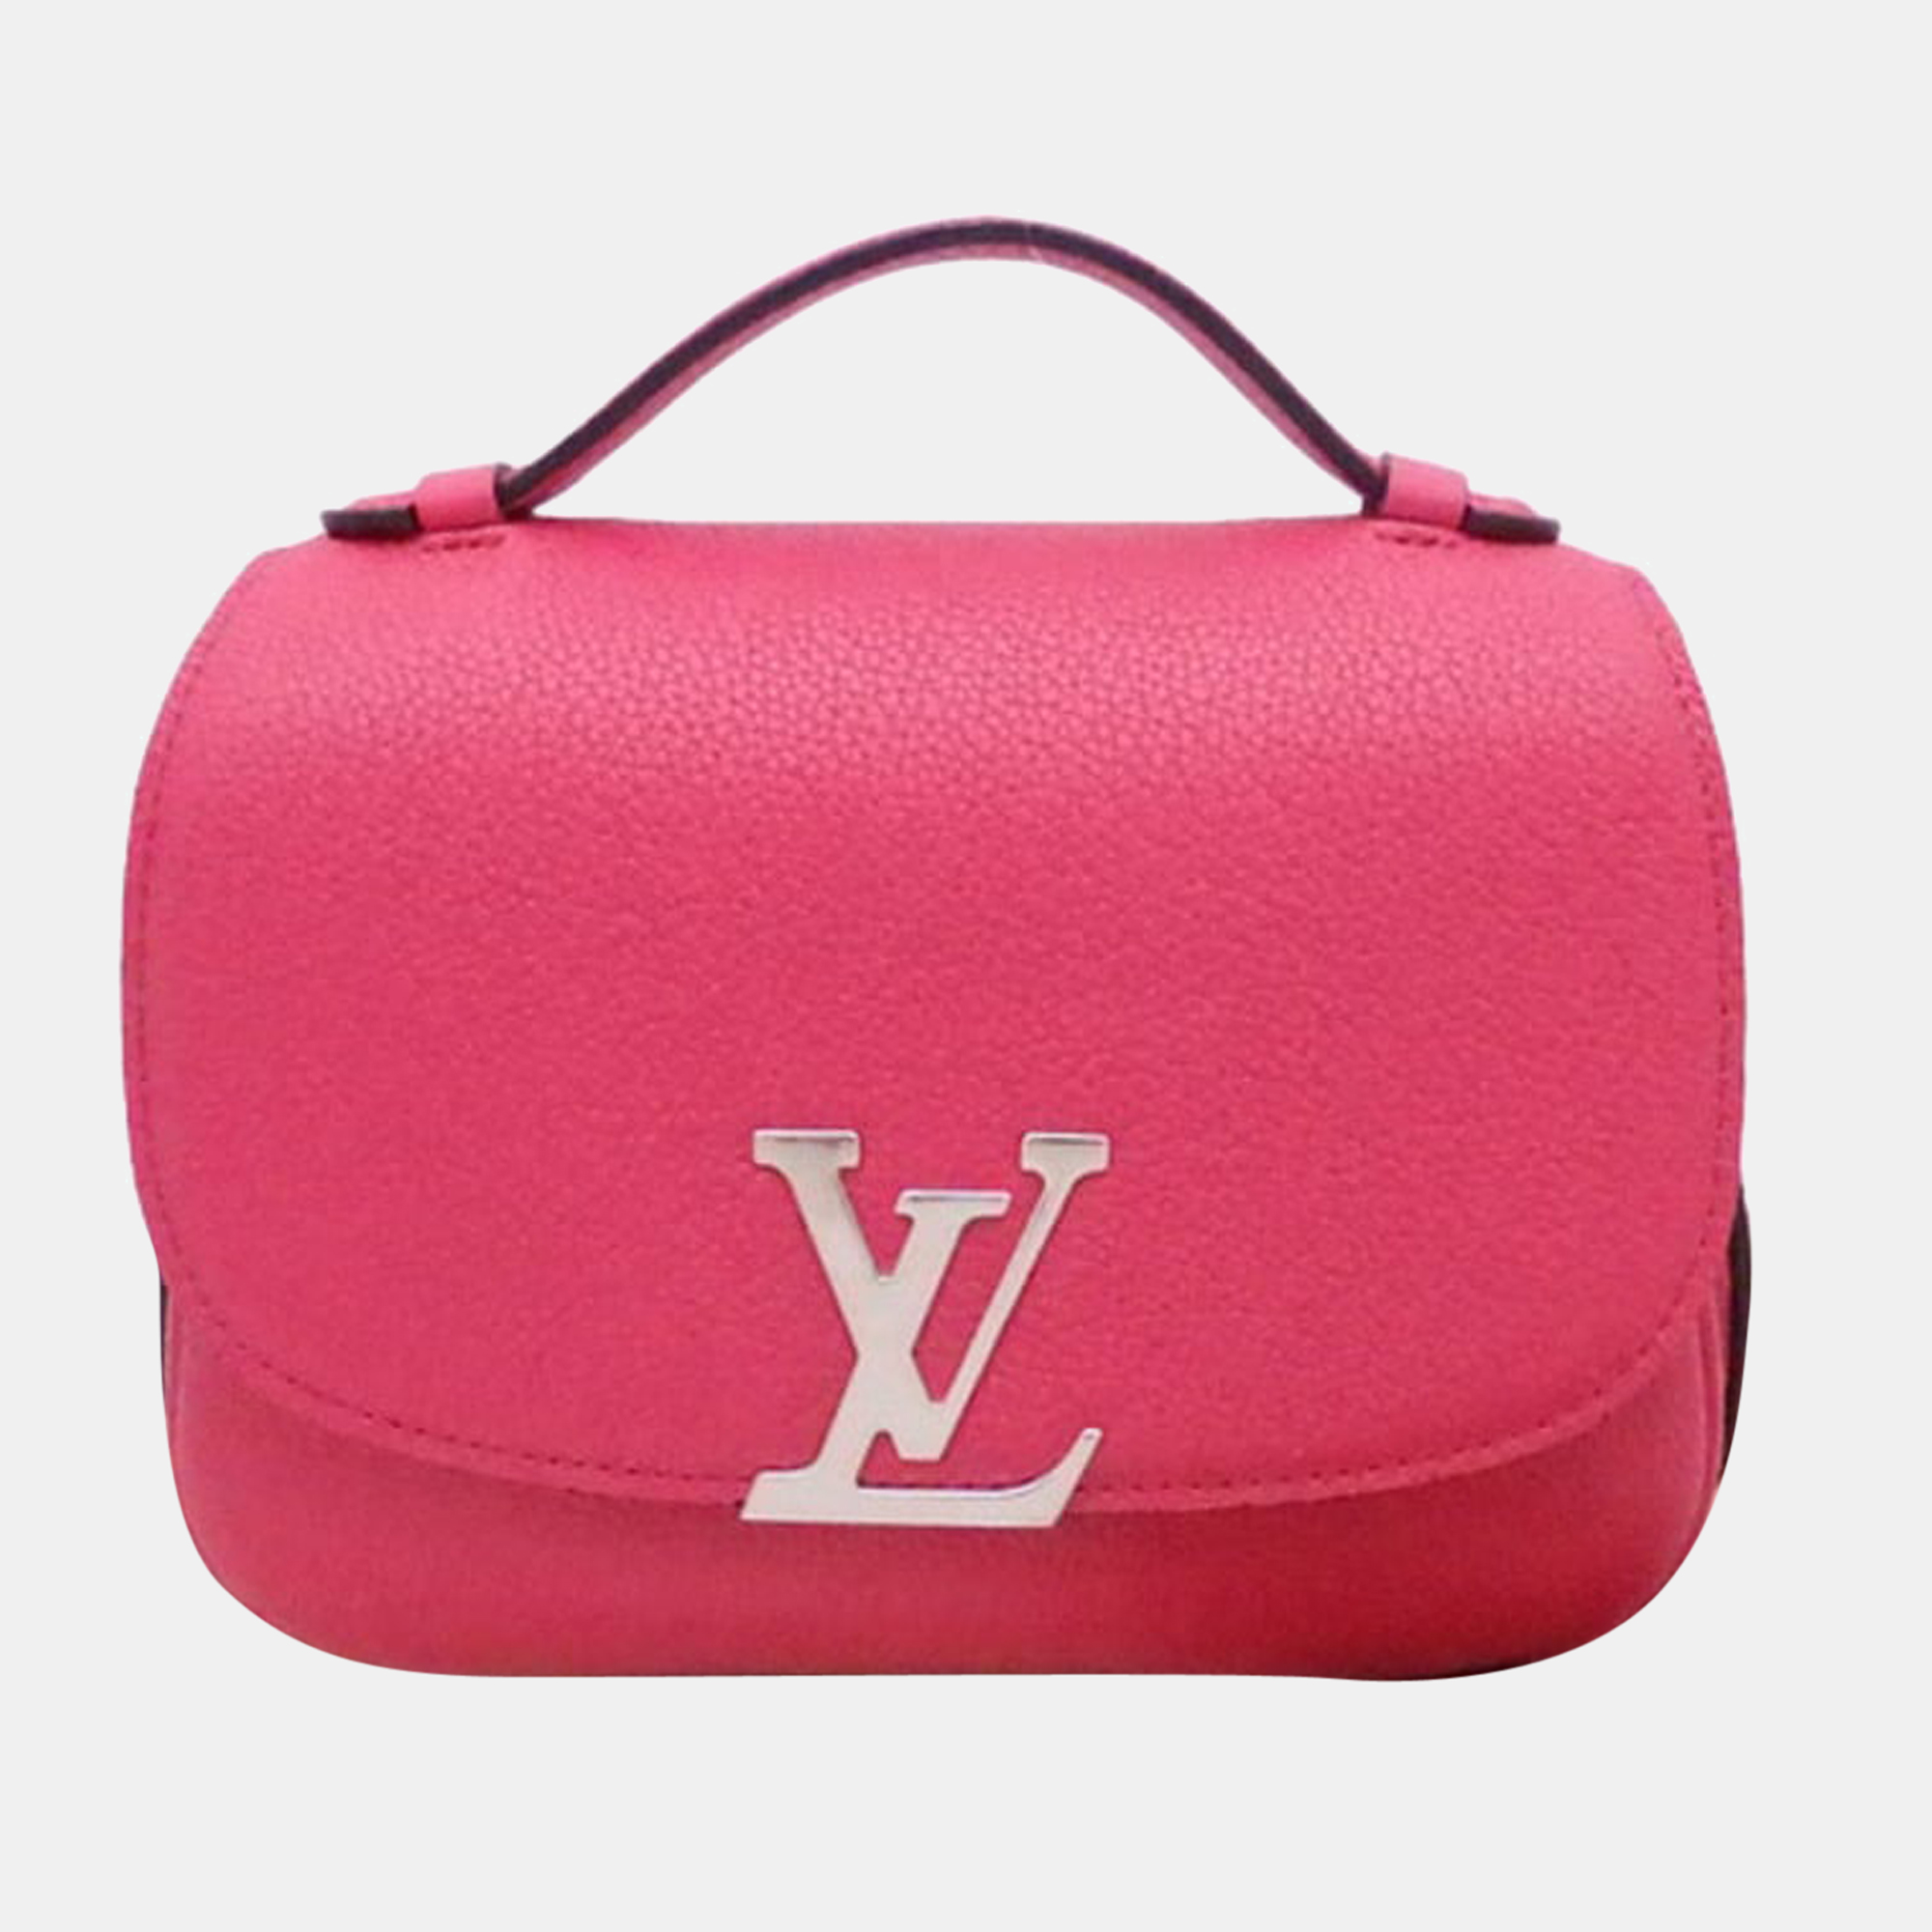 Louis+Vuitton+N%C3%A9oNo%C3%A9+Shoulder+Bag+MM+Pink+Leather for